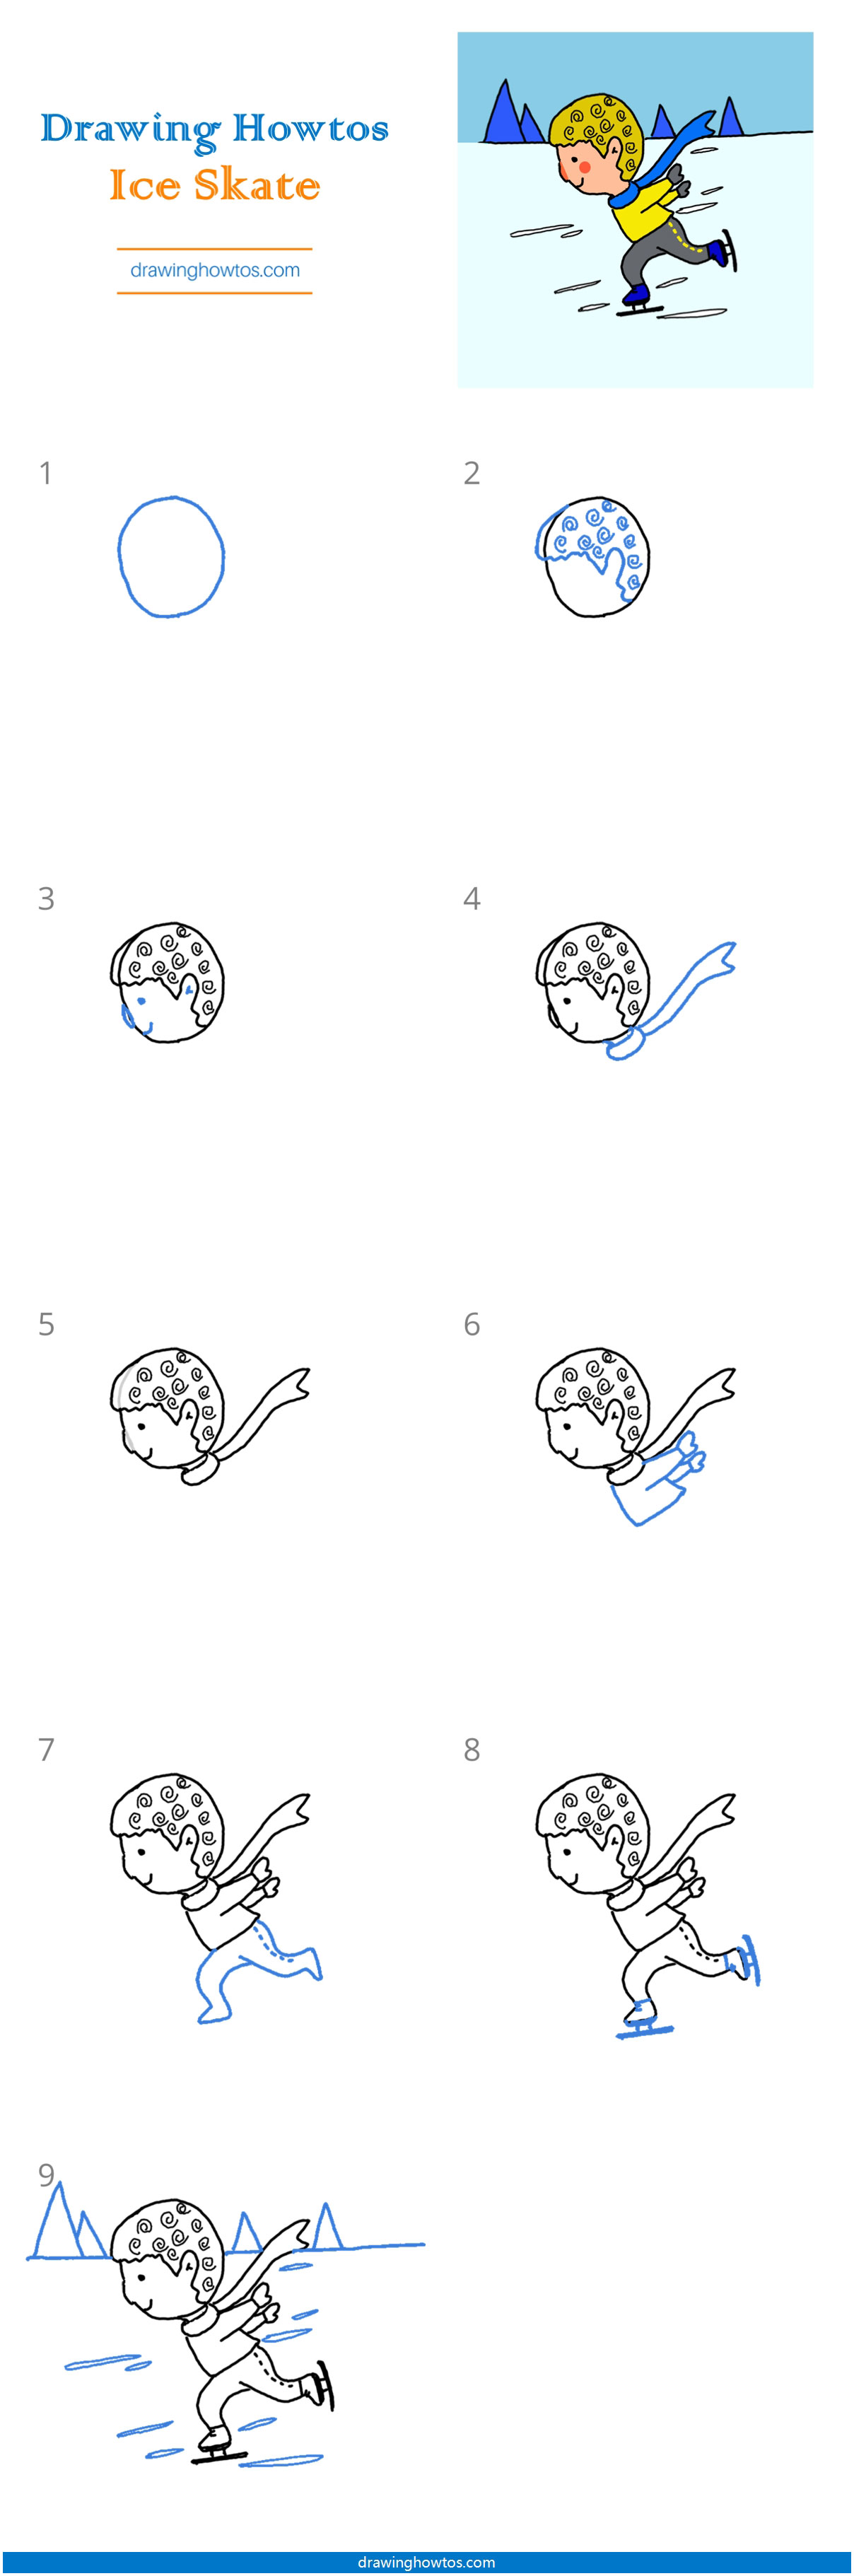 How to Draw an Ice Skater Step by Step